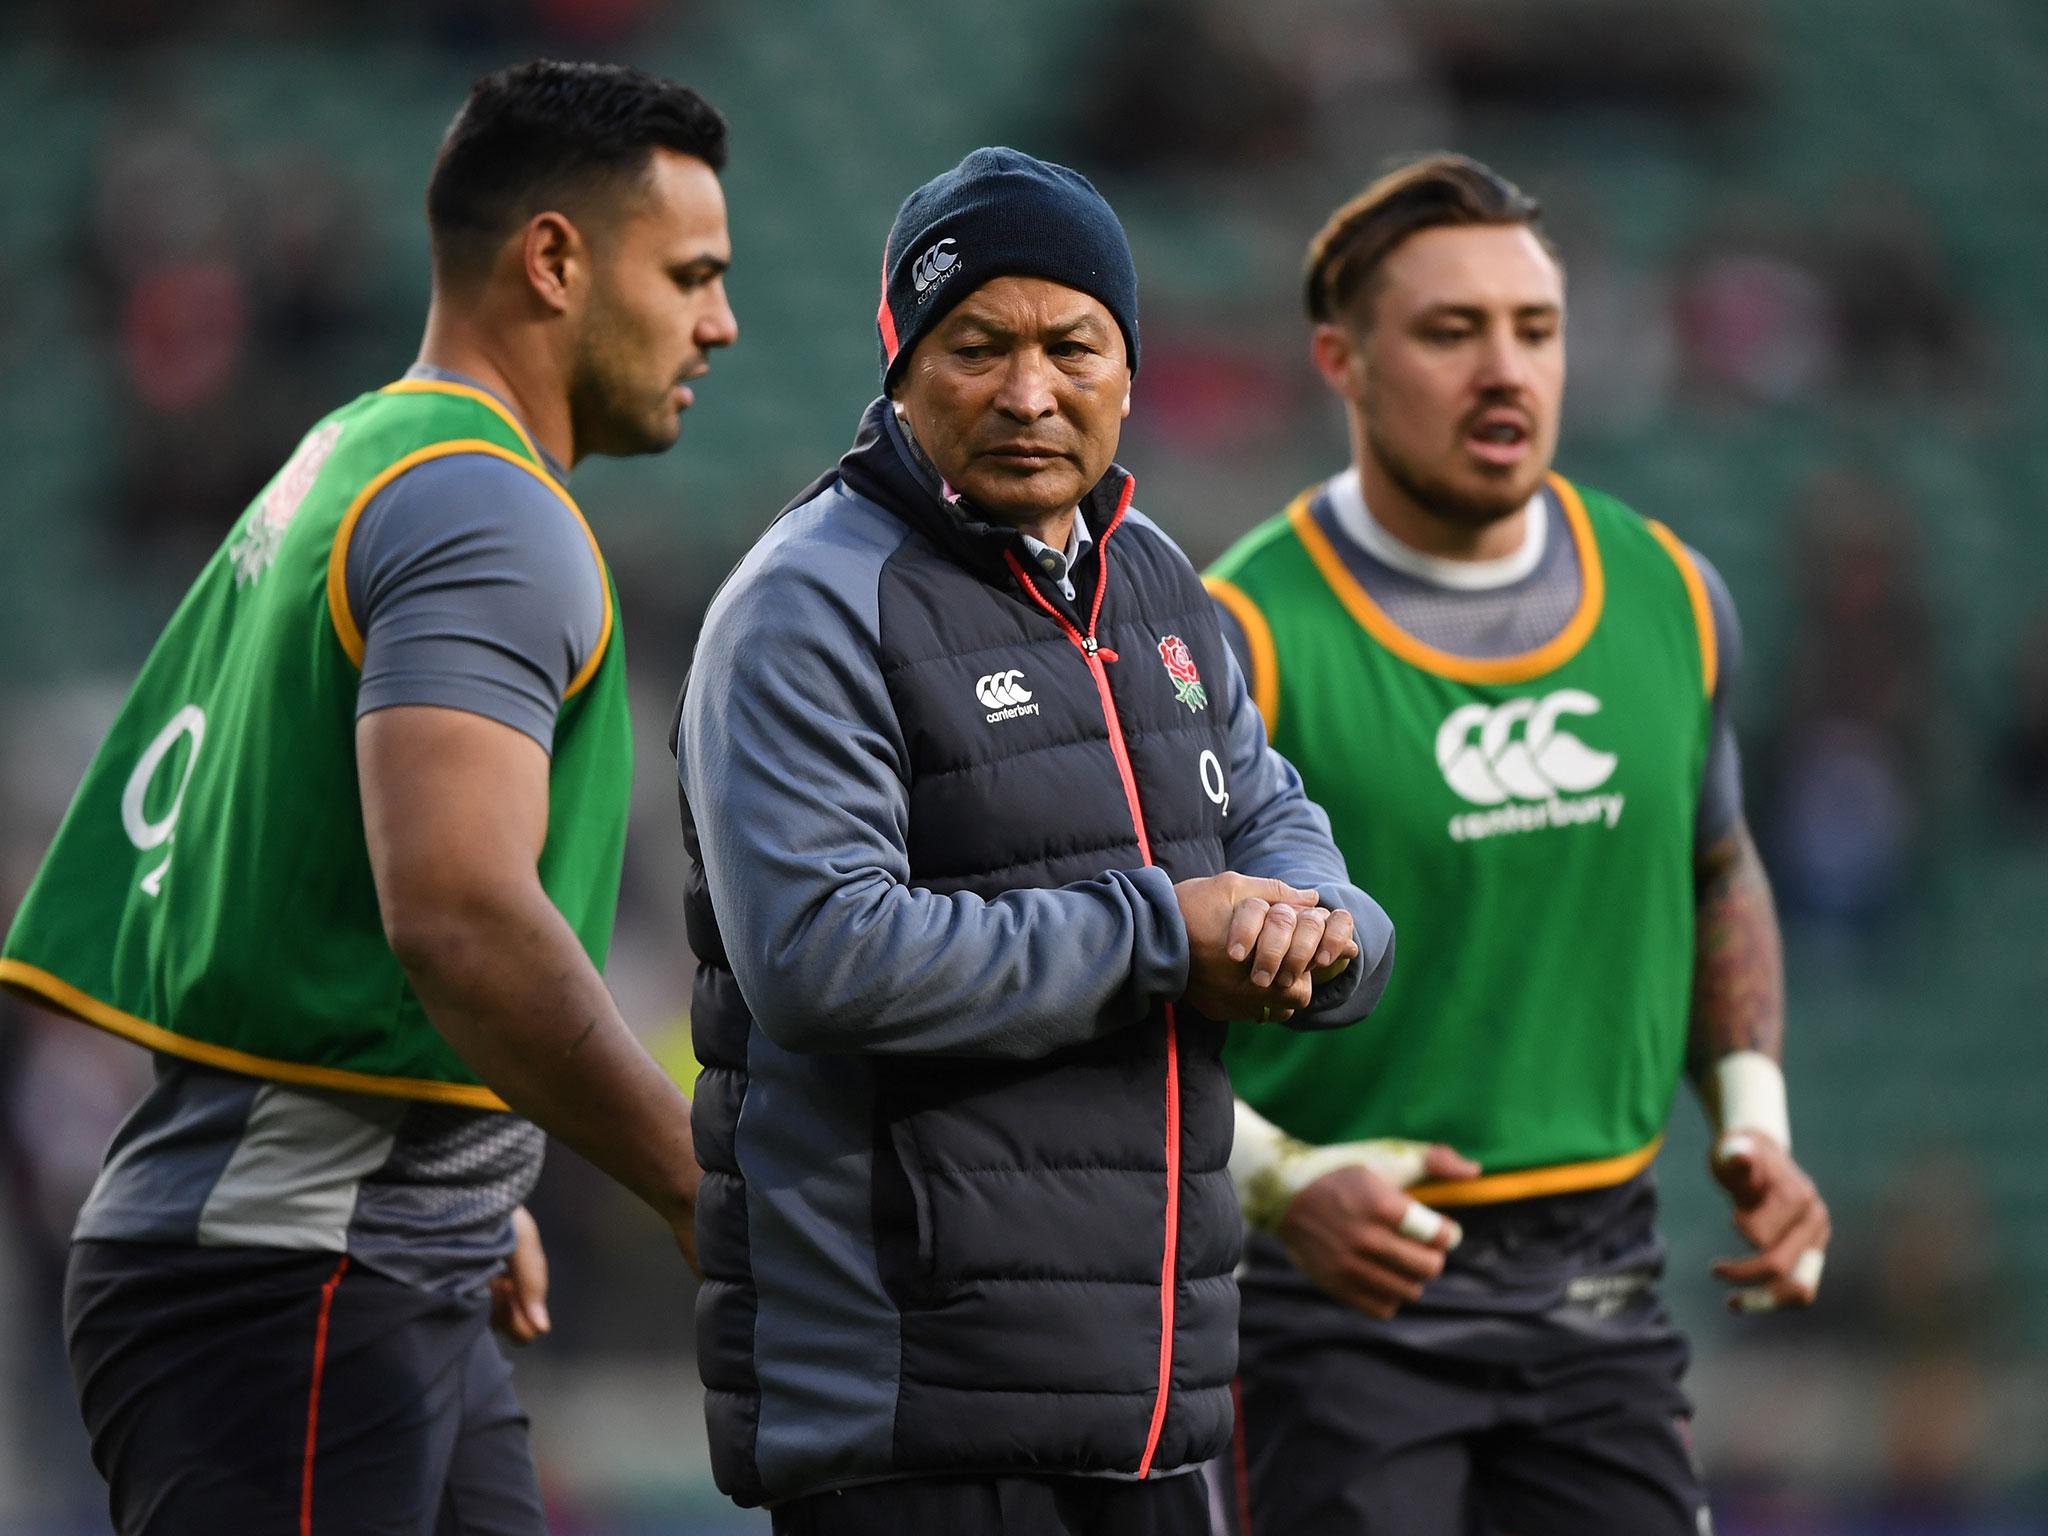 Eddie Jones takes England to Cardiff next weekend 12 years after suffering defeat in his last match there